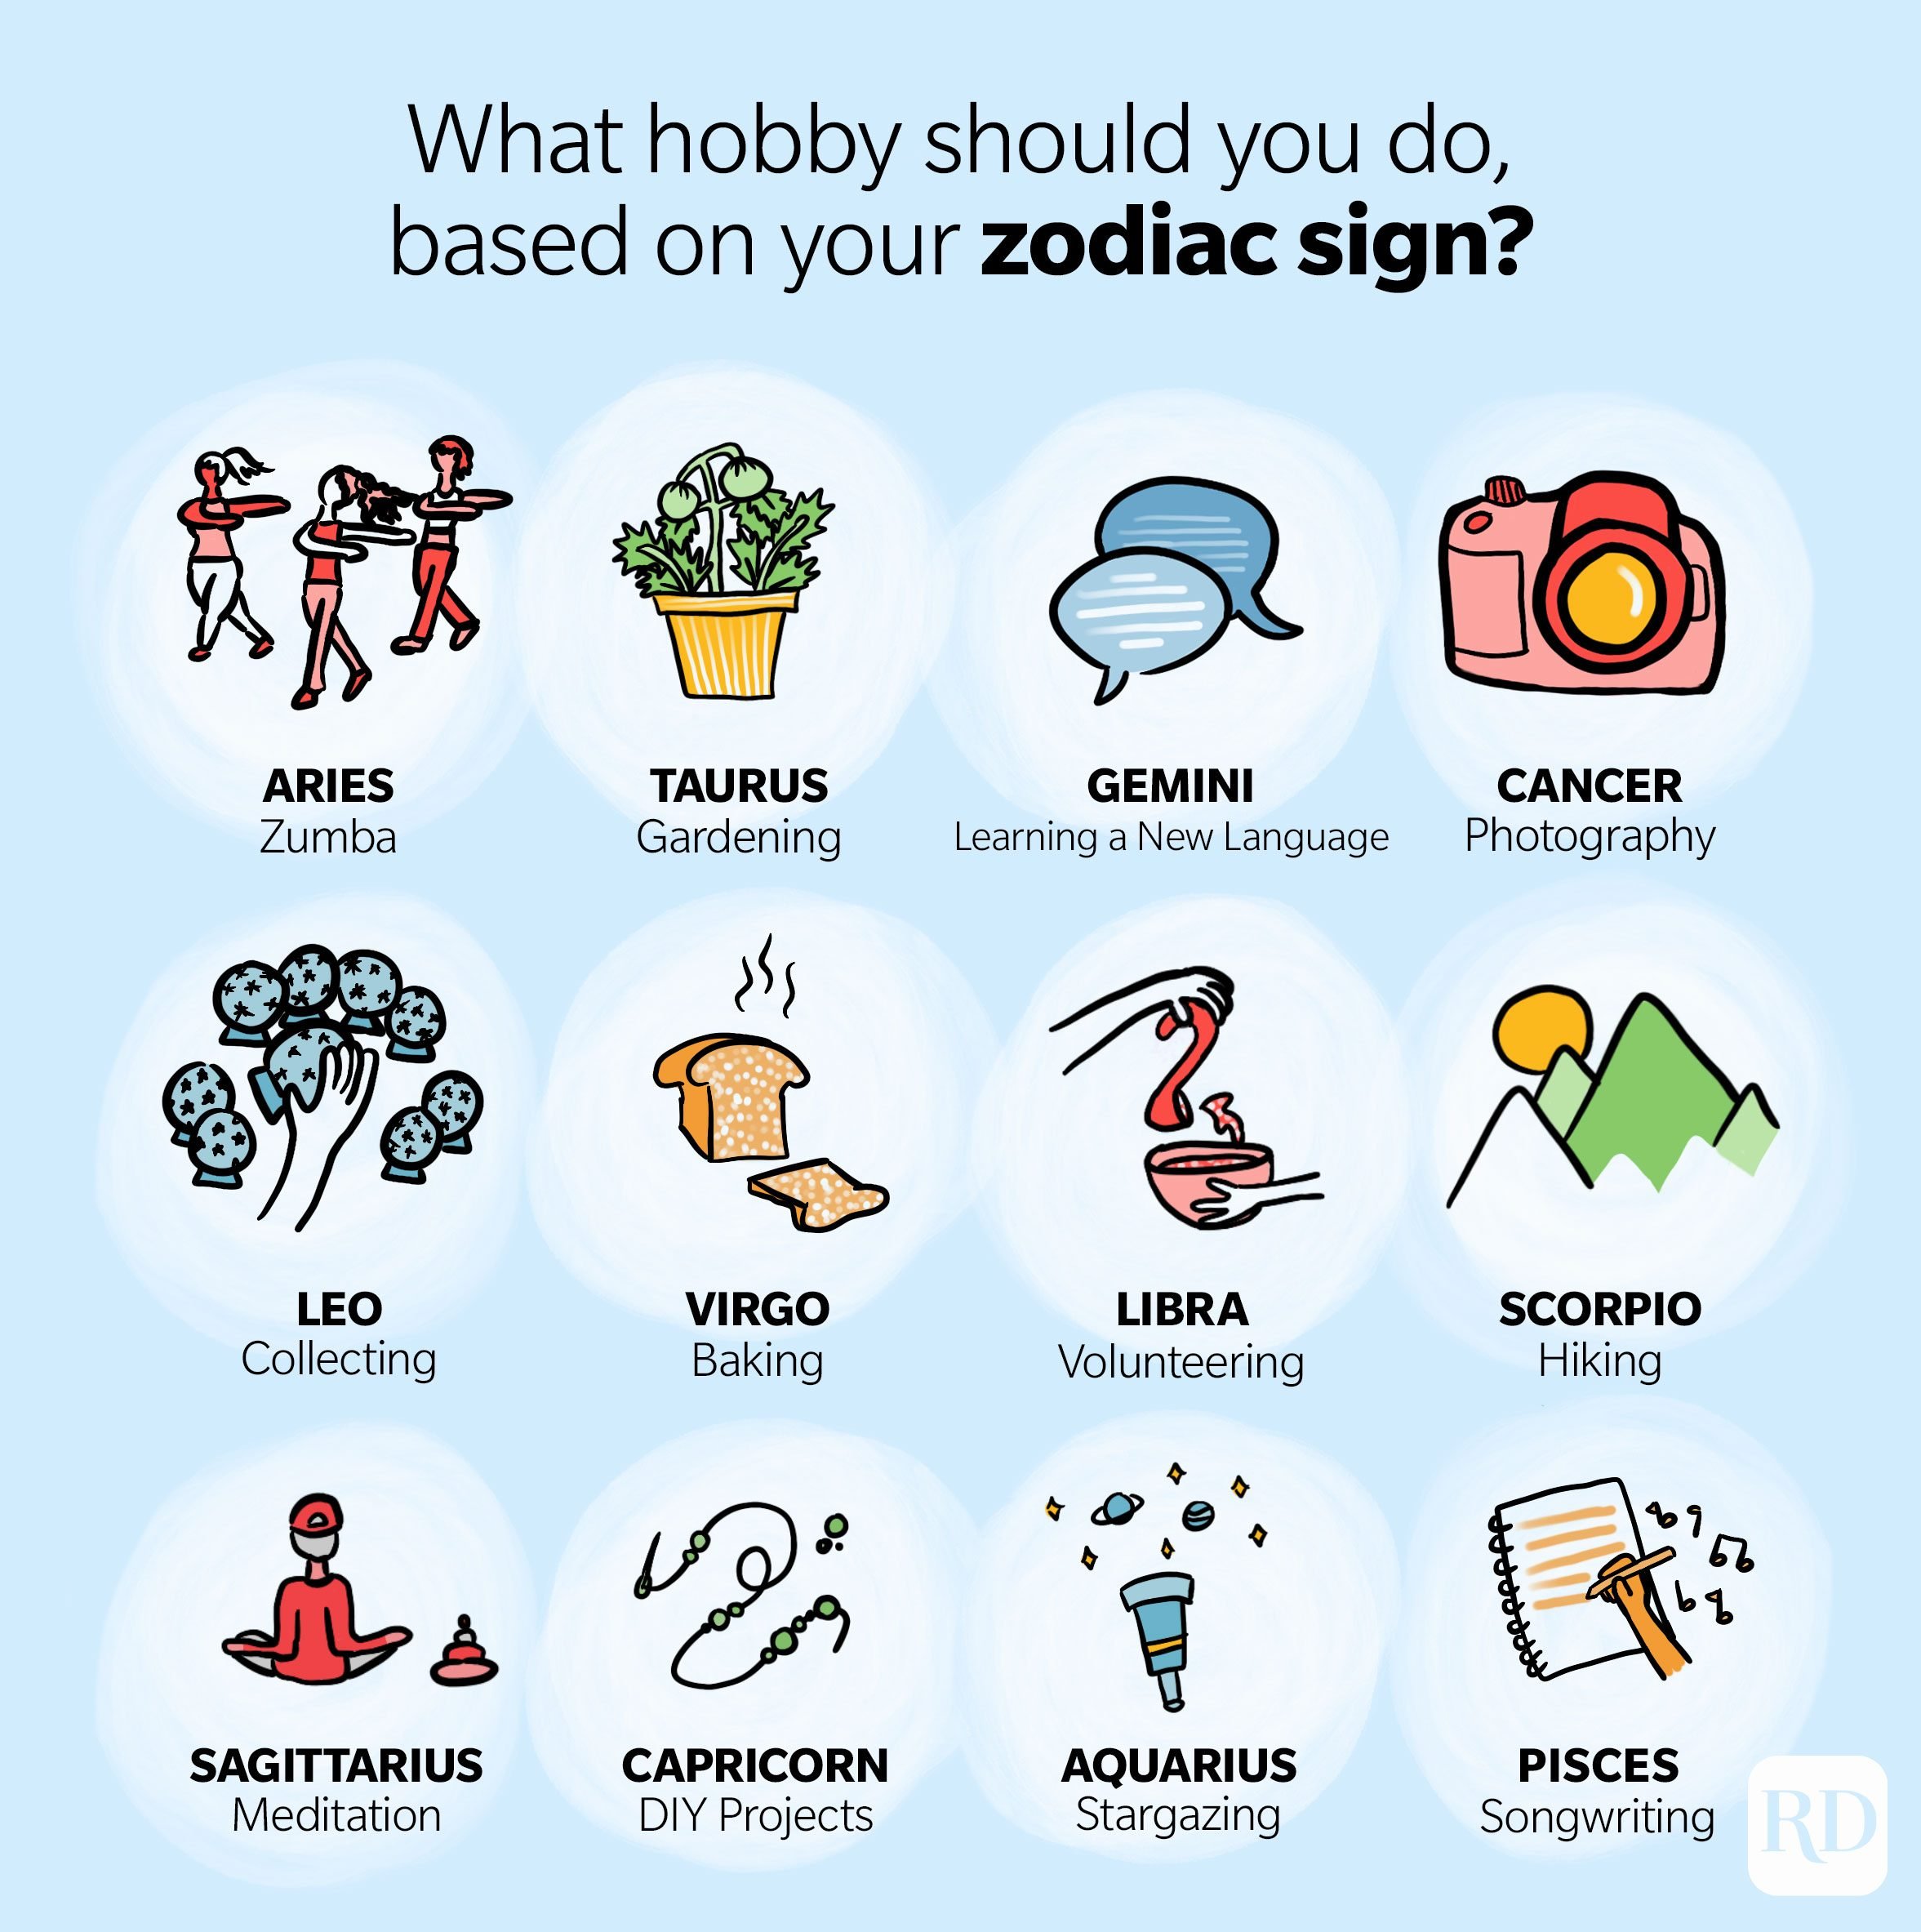 The Best Hobby for You, Based on Your Zodiac Sign | Reader's Digest